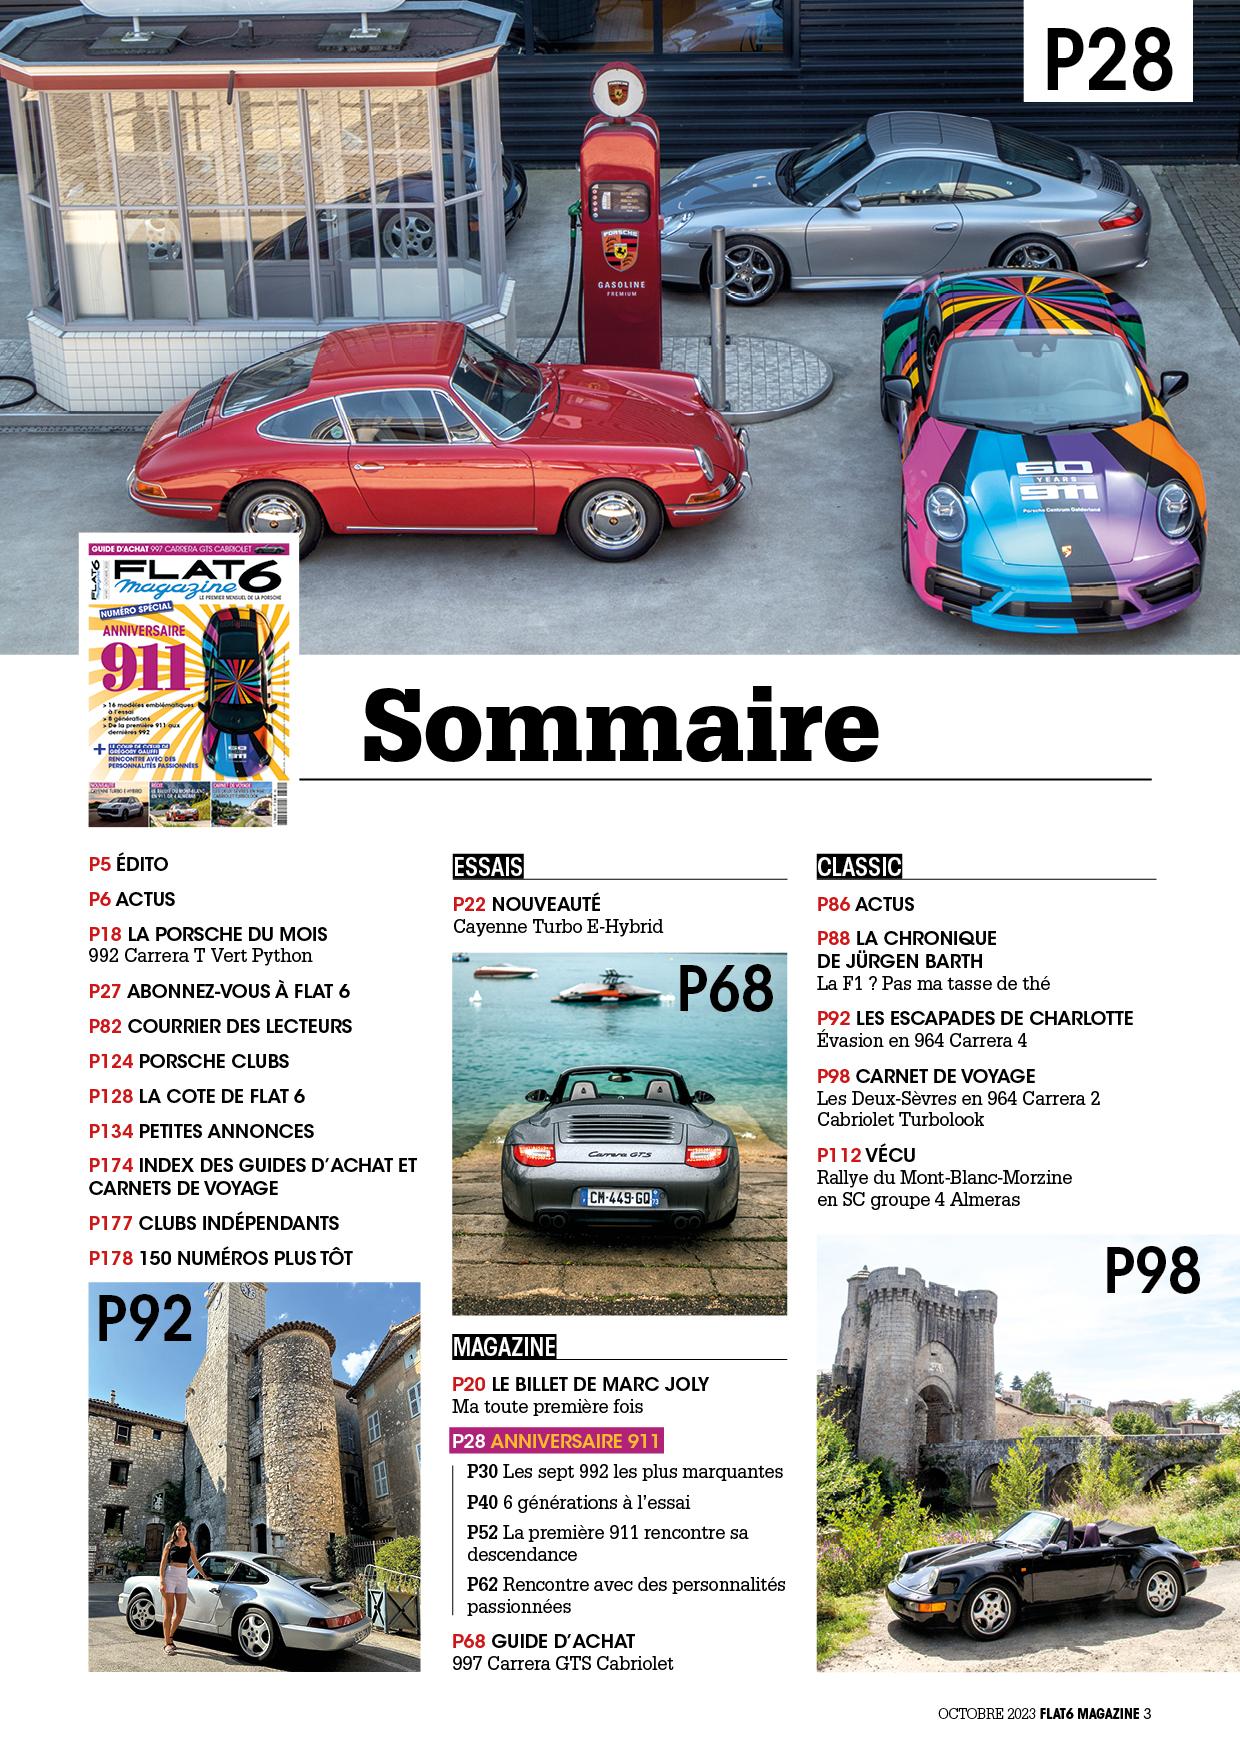 Sommaire391